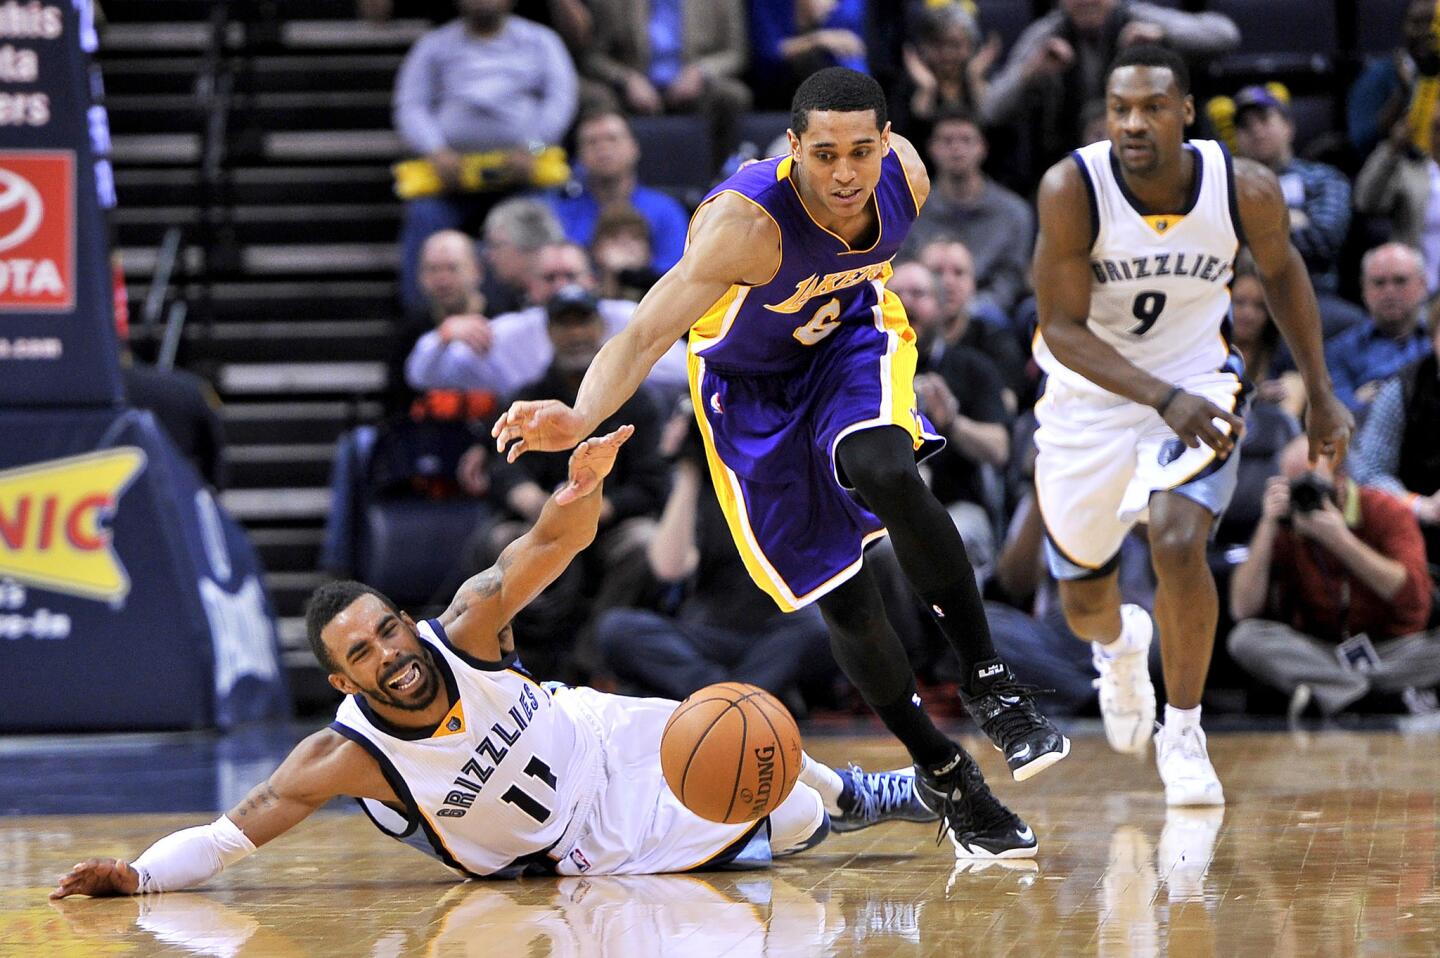 Grizzlies point guard Mike Conley falls to the court as Lakers point guard Jordan Clarkson steals the ball in the second half.